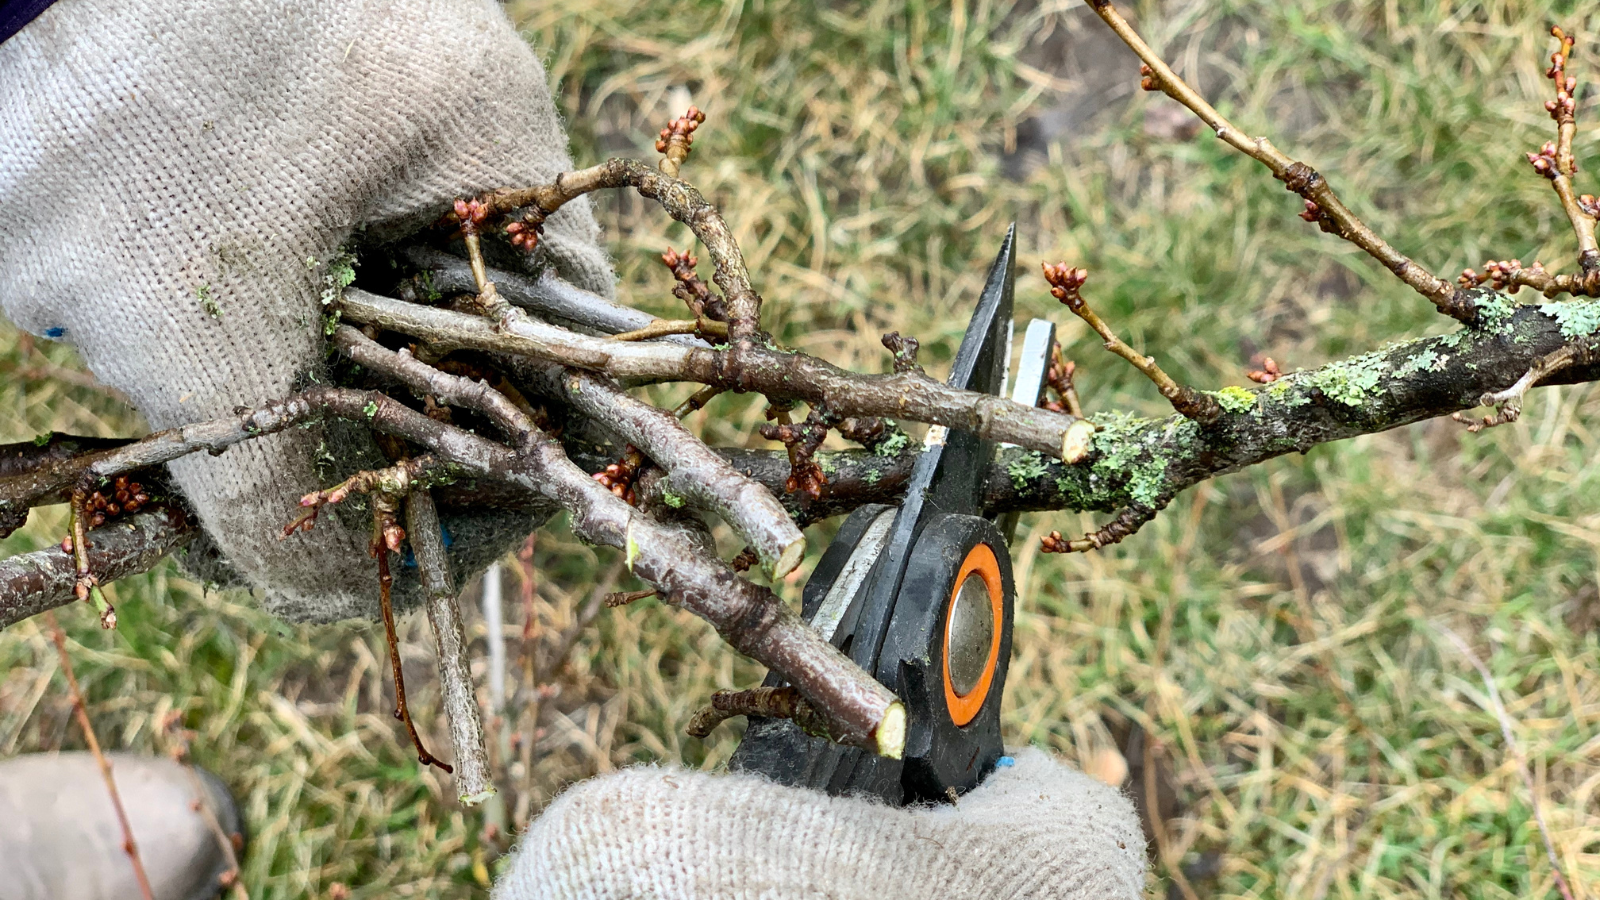 hands with gloves pruning tree in winter